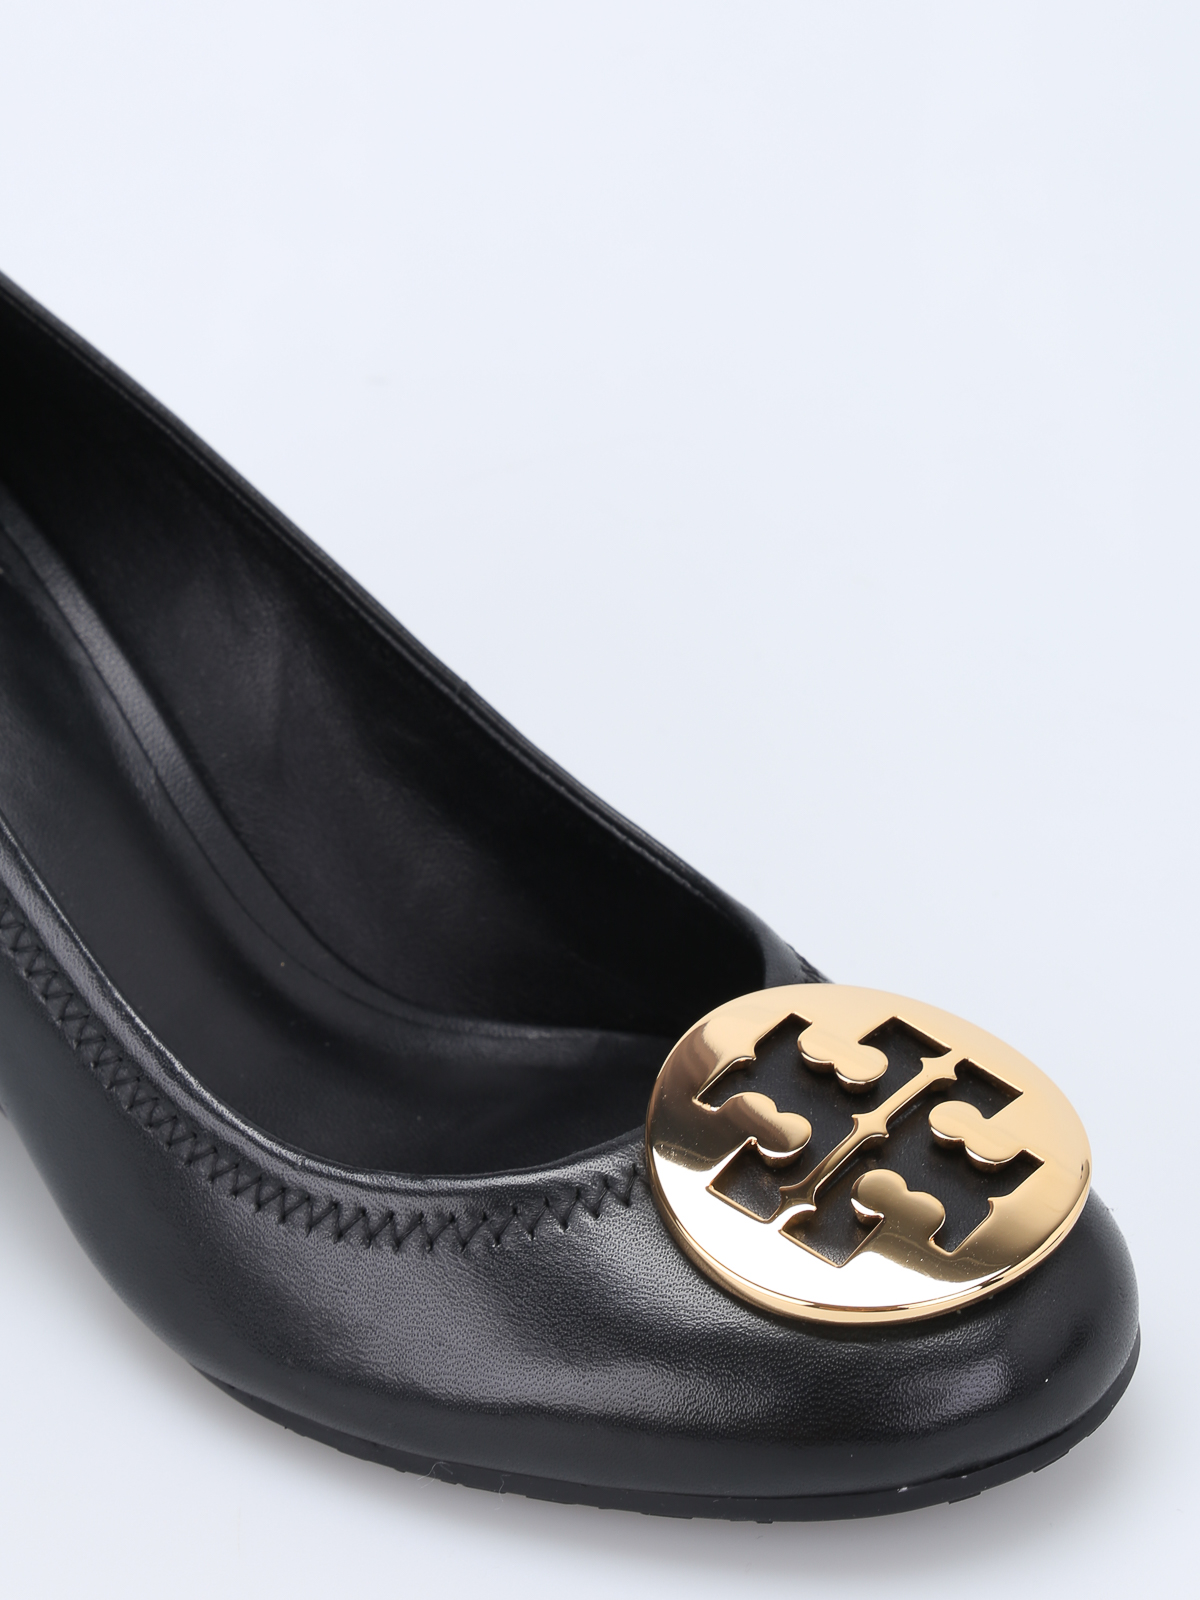 Court shoes Tory Burch - Sally wedge pumps - 50008644051 